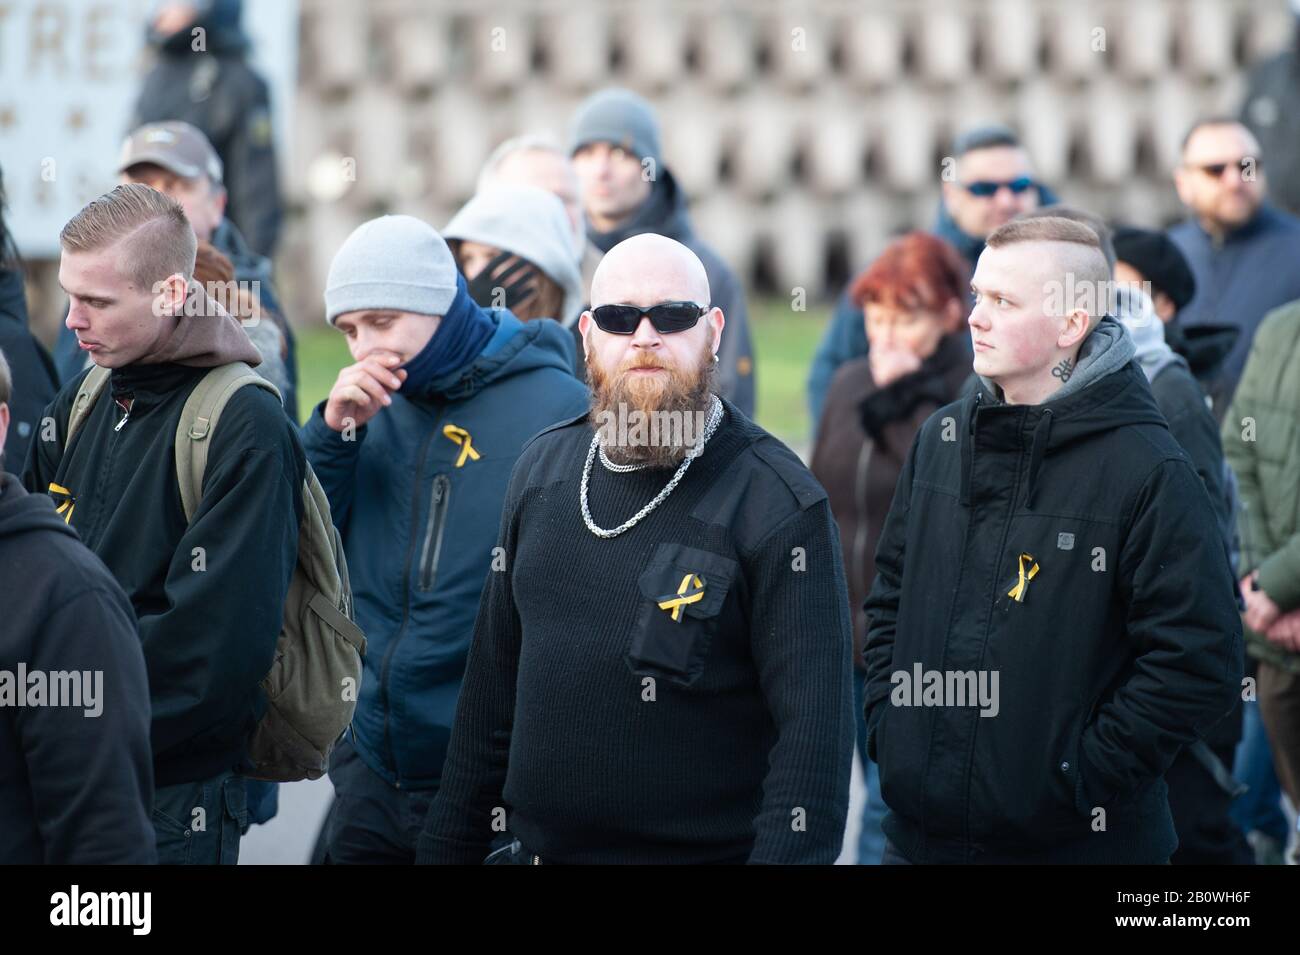 15th February 2020. Dresden, Saxony, Germany. Pictured: Far-right supporters join the march.  / Far-right groups converge on Dresden to take park in a Stock Photo